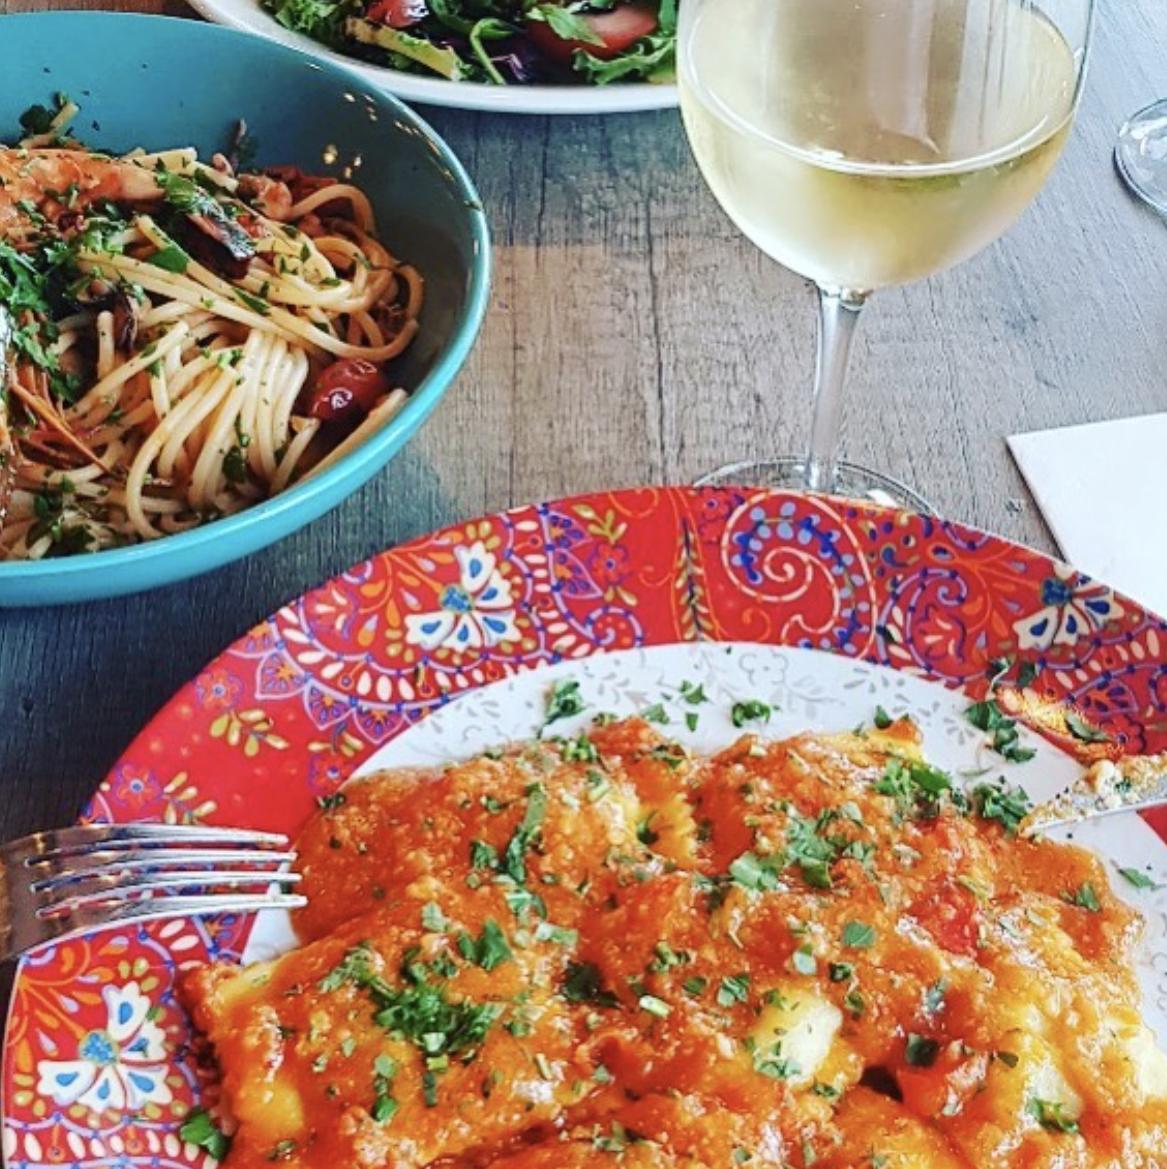 LOOOOOK lobster & crab meat stuffed ravioli accompanied by our #organic wine fro, Ciro 🍷😋 see you all later 🤗Seafood dishes are my absolute fave! 🤩 @MetroUK_Life @Londonist @ESGoLondon @StylistMagazine @visitlondon #italianlife #OrganicSeptember